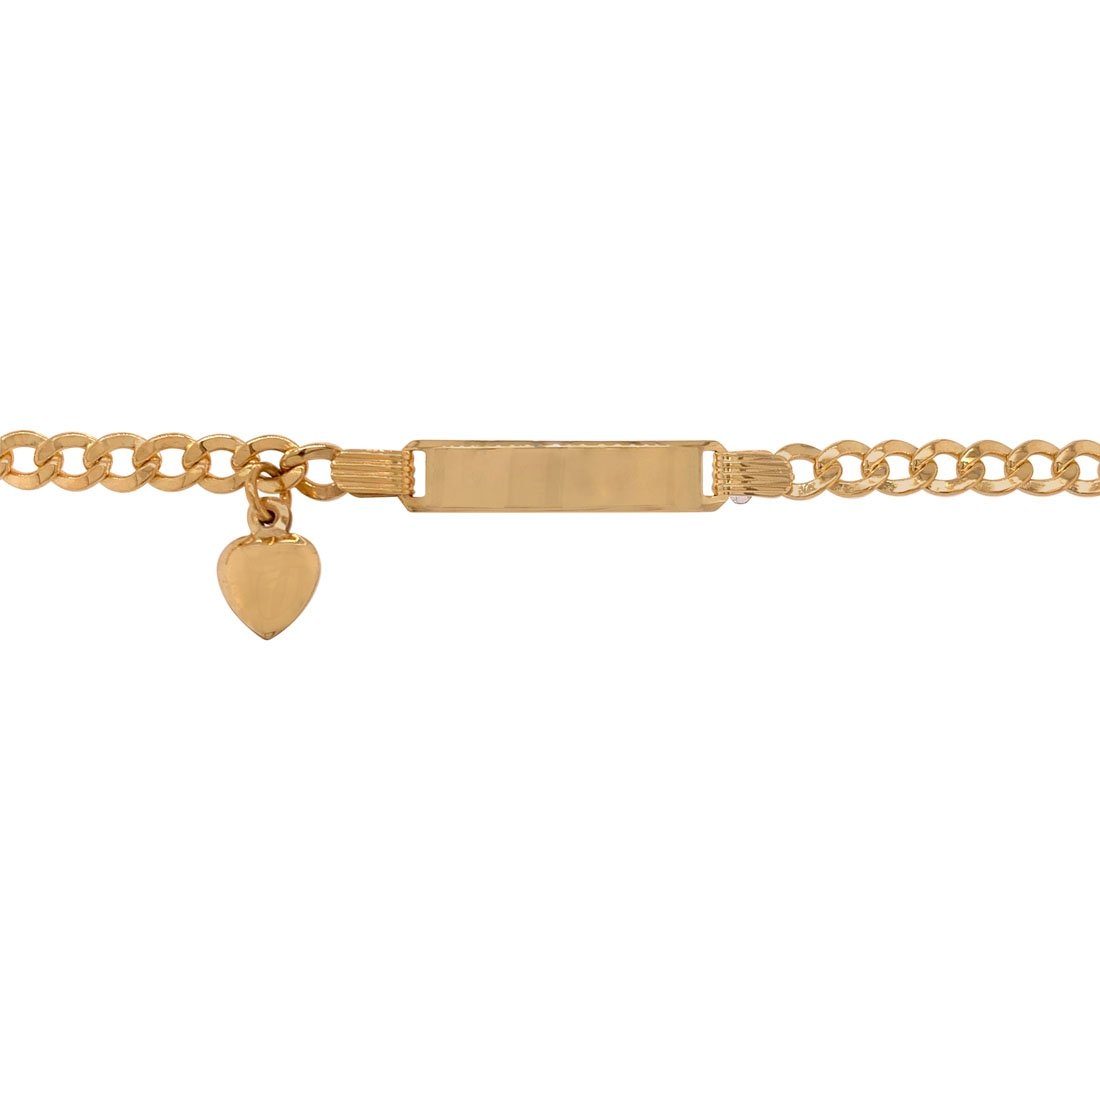 Girls 9ct Yellow Gold ID Bracelet with Heart Charm Bracelets Bevilles 